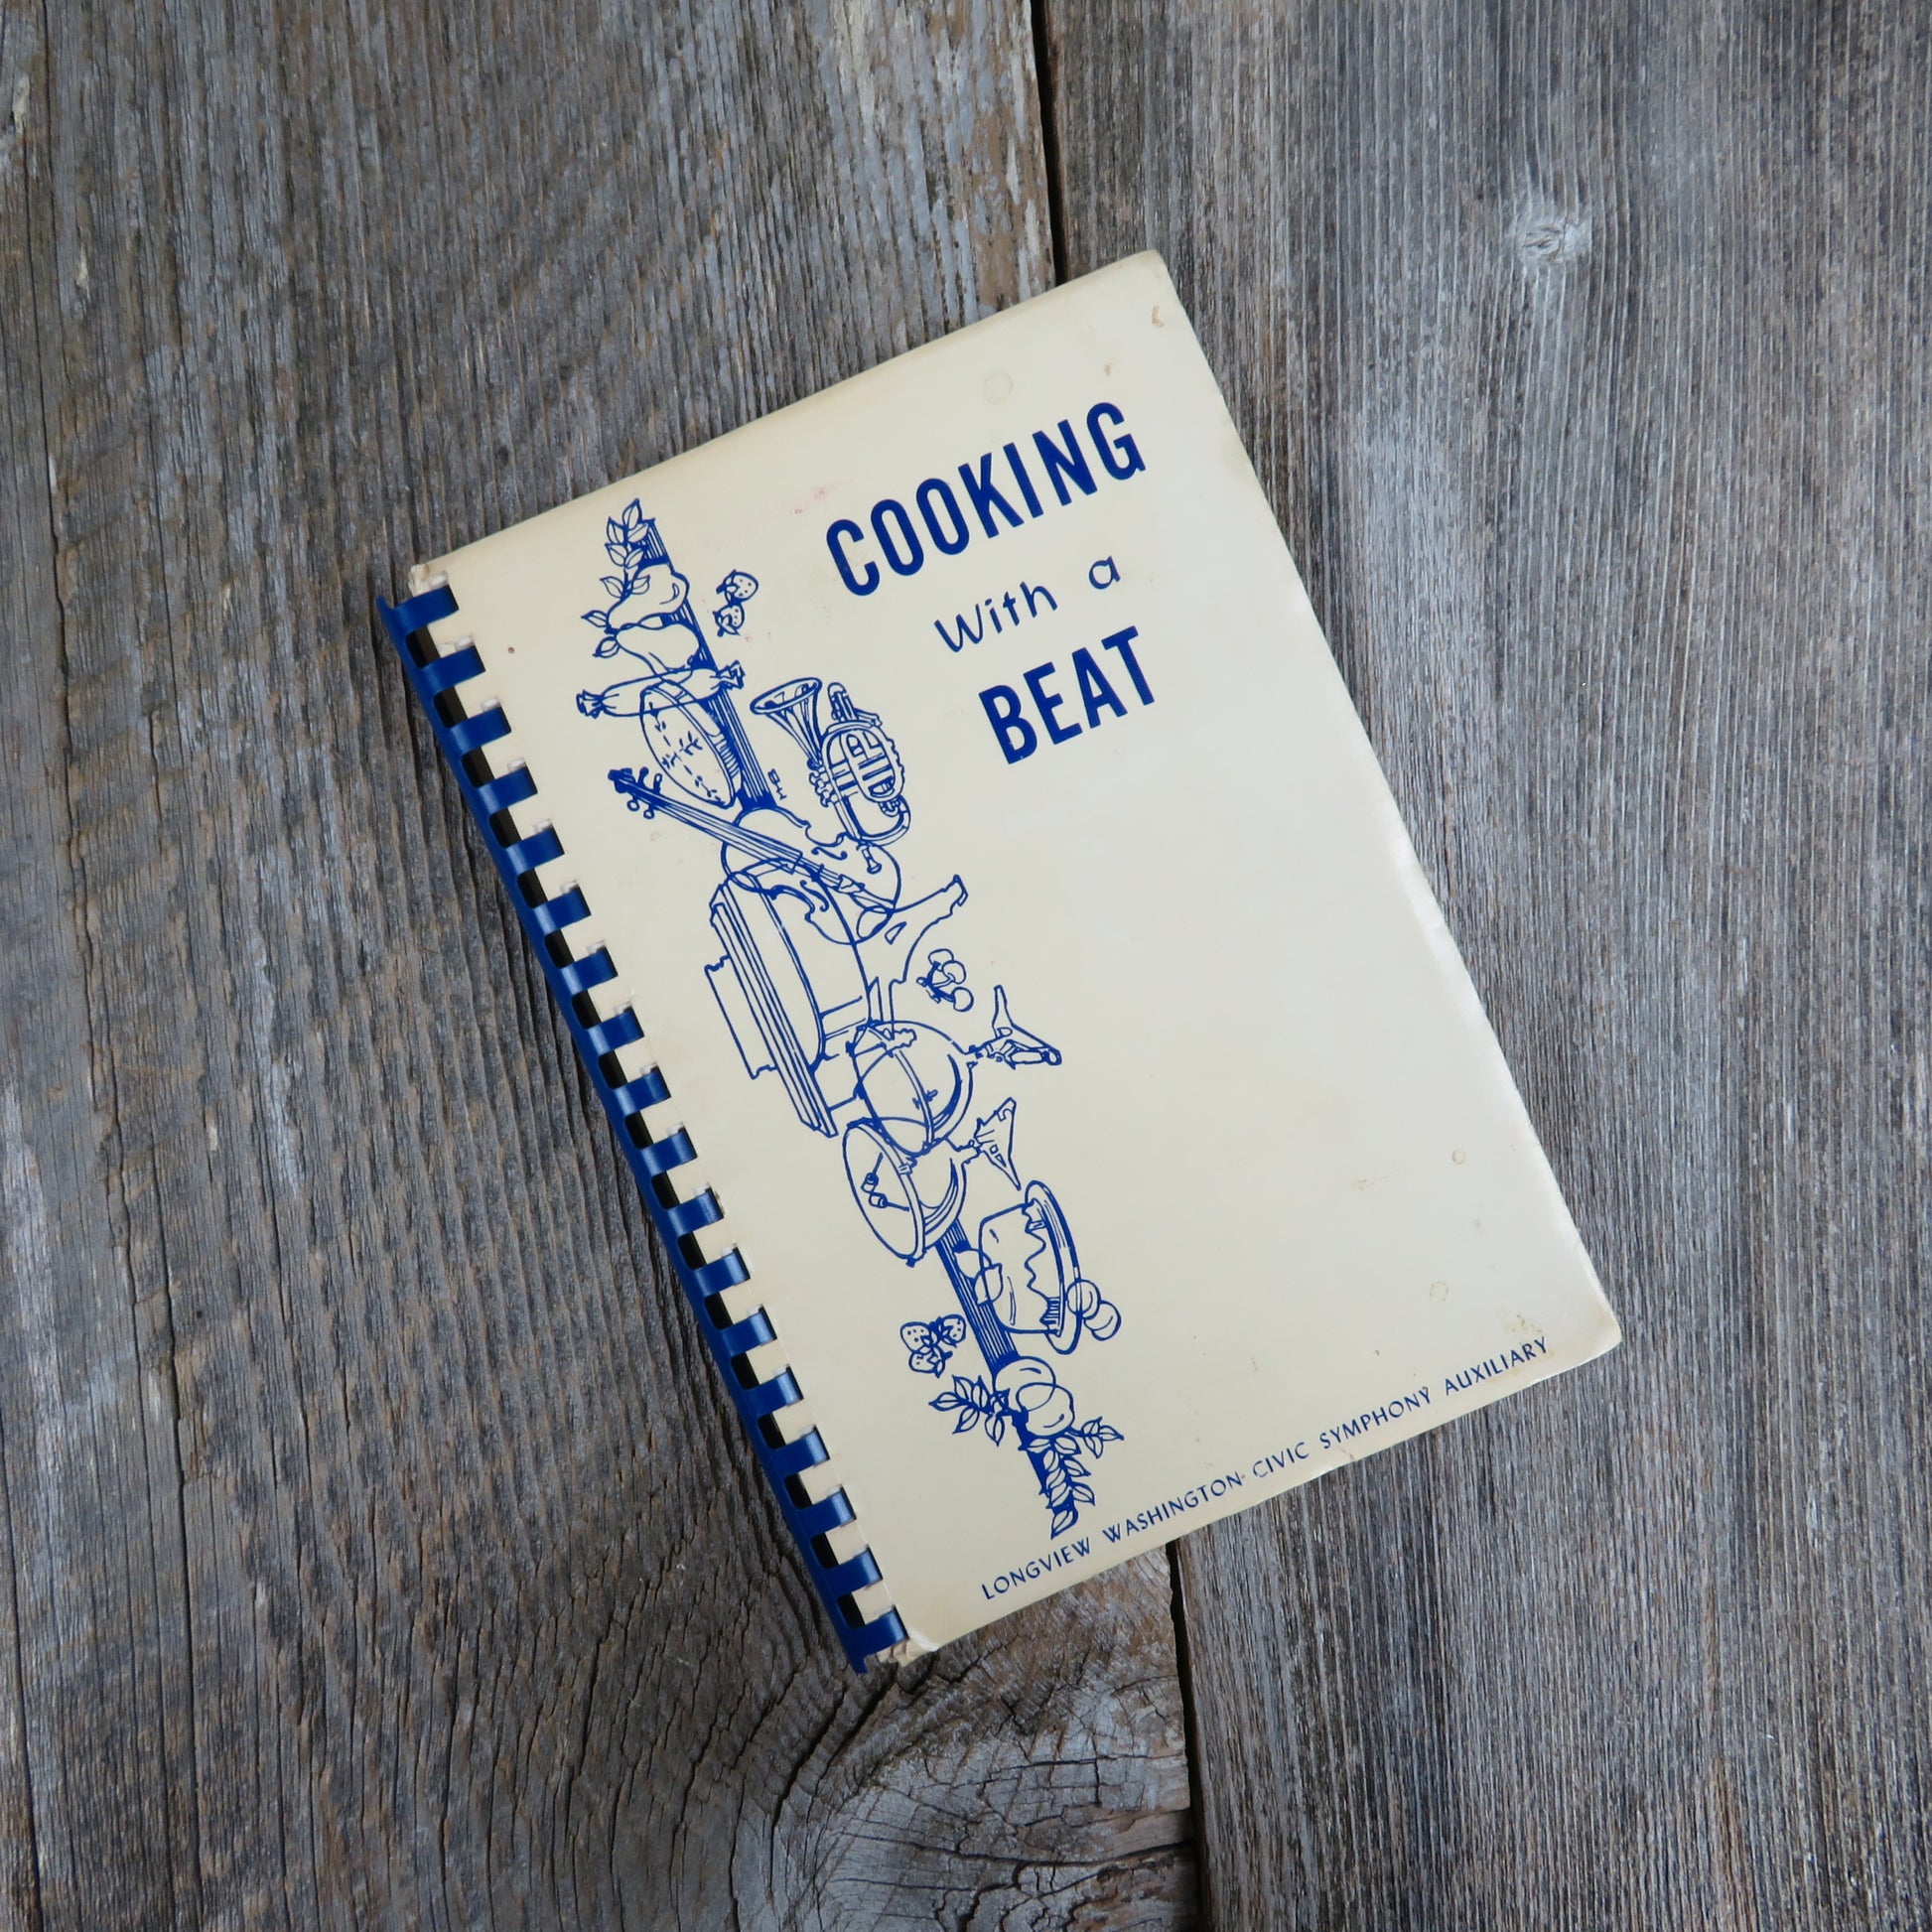 Vintage Washington Cookbook Longview Civic Symphony Auxiliary Cooking with a Beat Band 1976 - At Grandma's Table